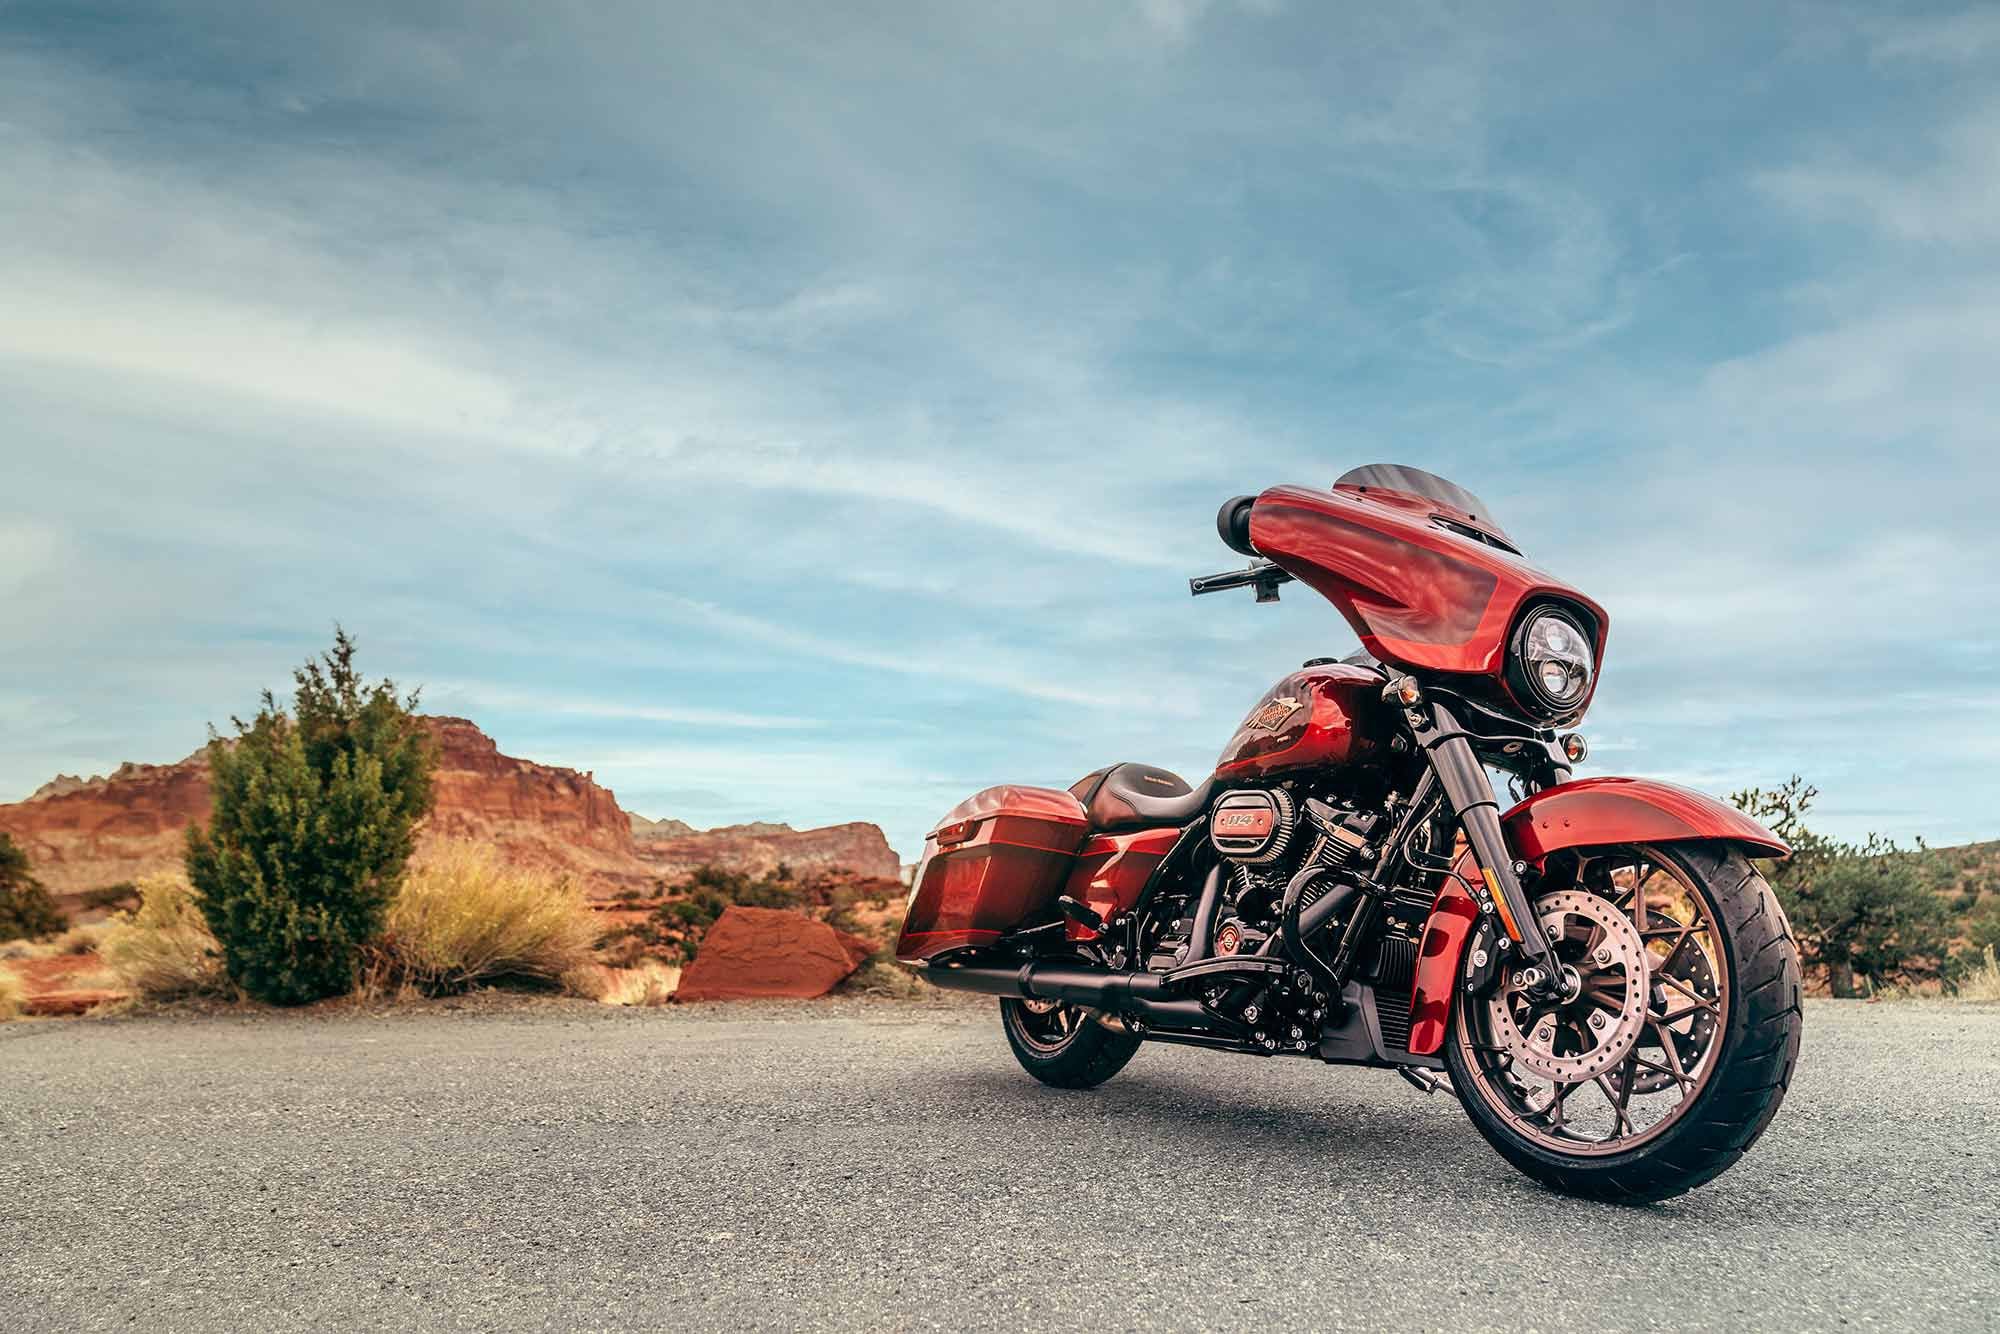 2023 Harley-Davidson Street Glide Special Anniversary edition, limited to 1,600 units worldwide.